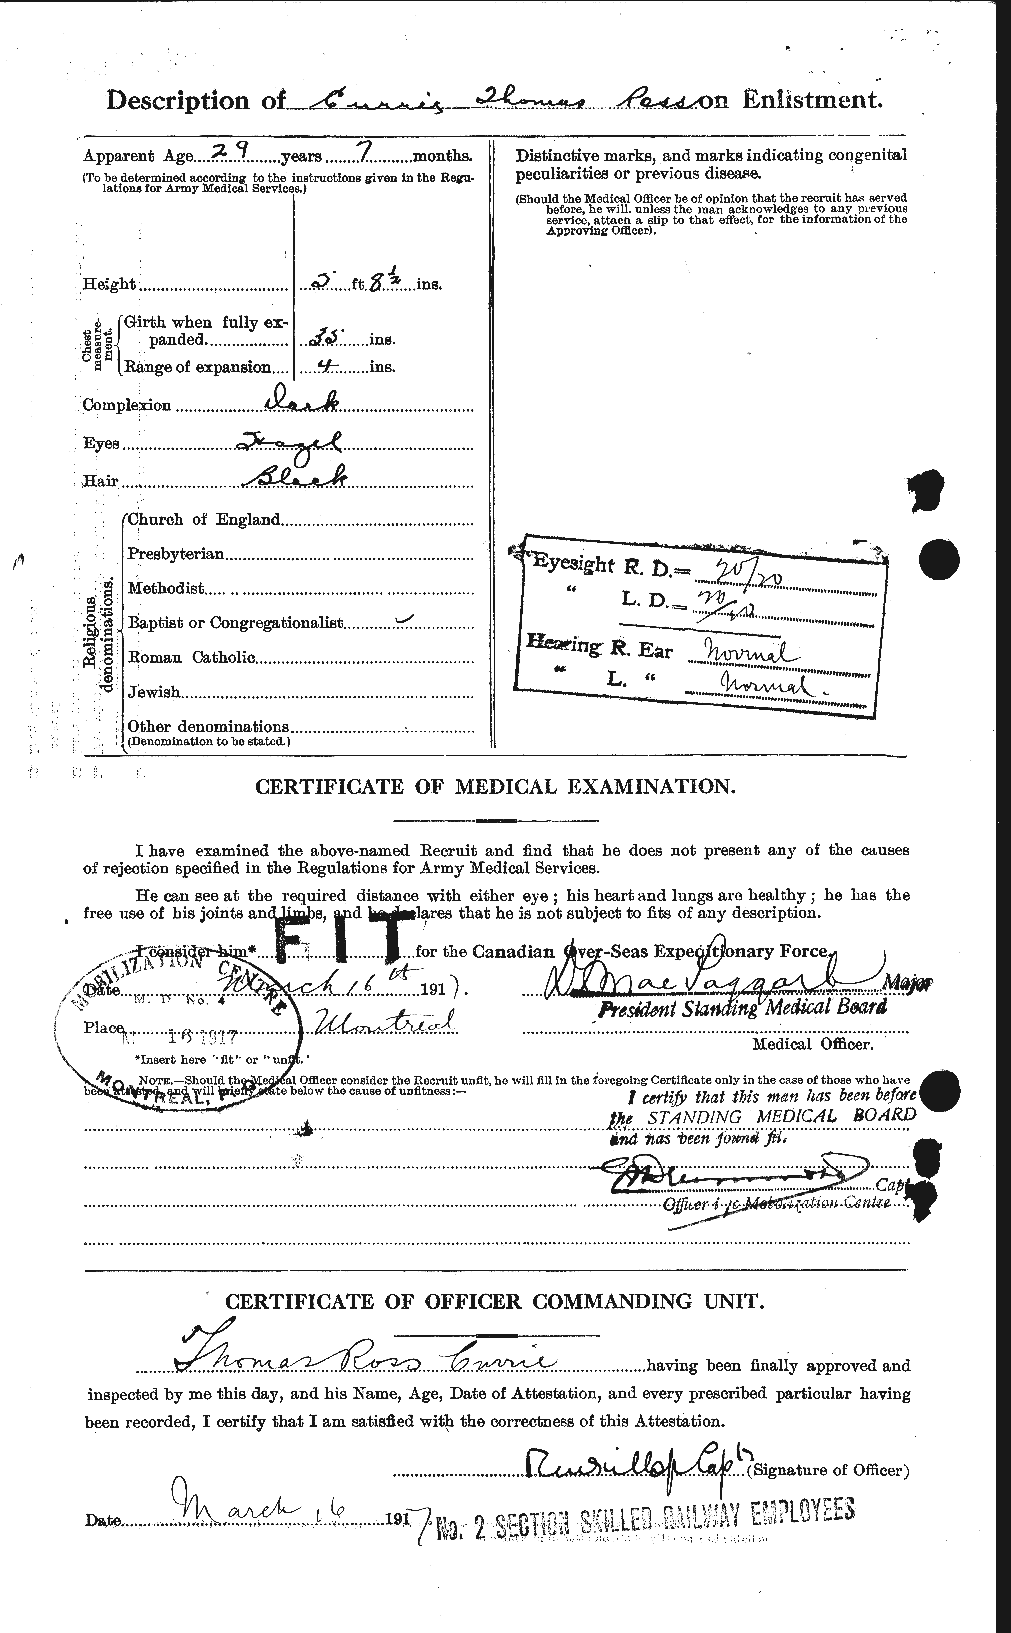 Personnel Records of the First World War - CEF 071813b